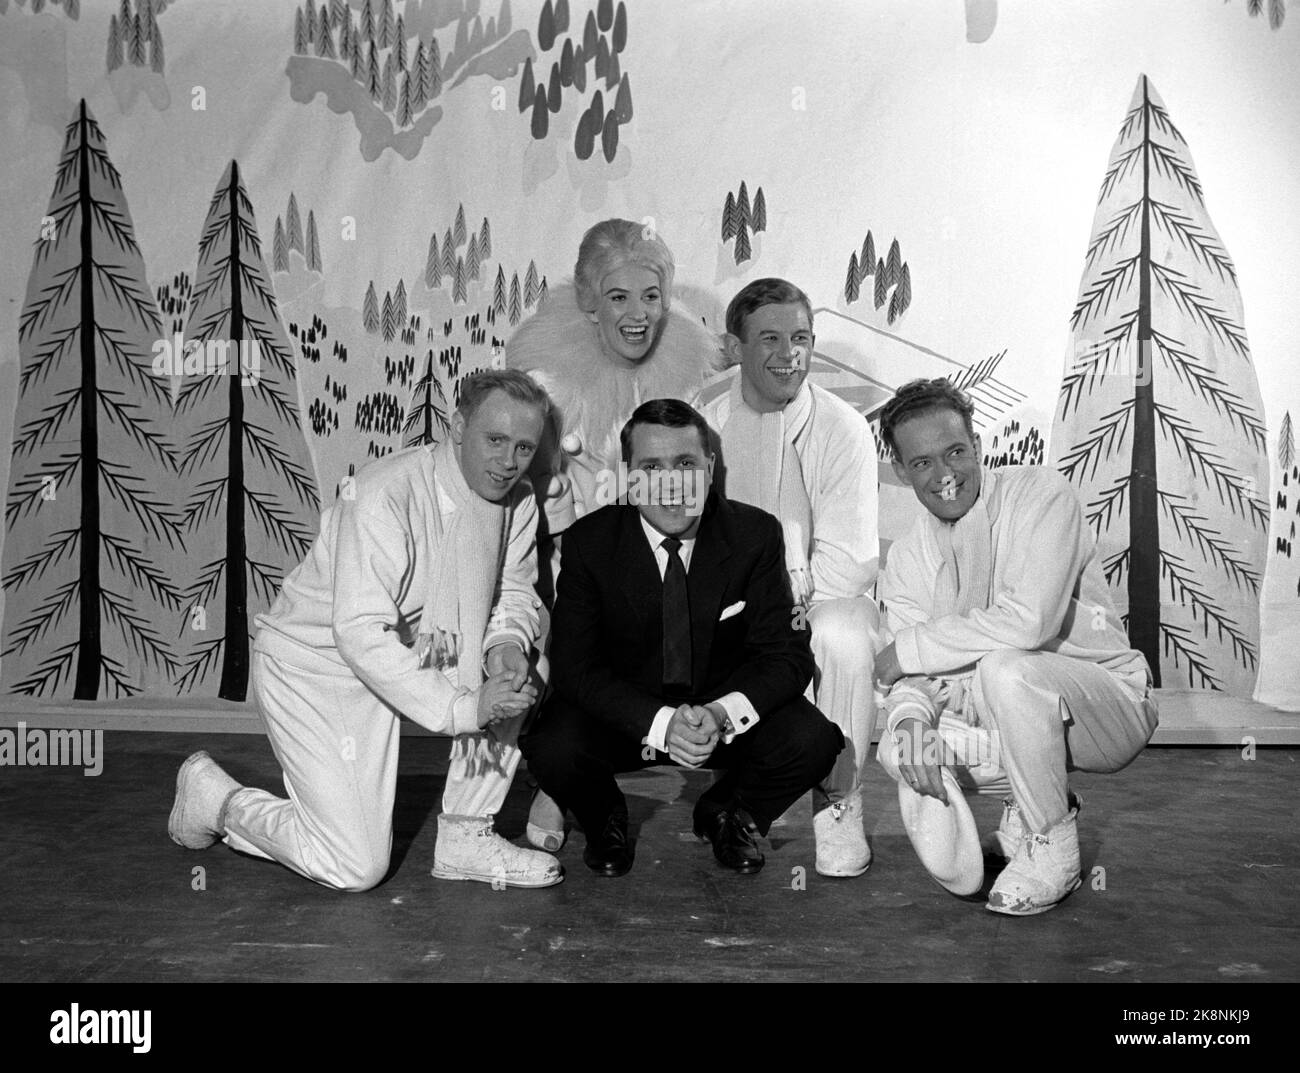 Oslo 19600401. Egil Monn-Iversen is a composer, conductor, organizer, director of the concert agency and the record label, and audit director. In the picture he is with the group The Monn Keys, f.v. Arne Bendiksen, Sølvi Wang, Per Asplin and Oddvar Sanne. Photo Sverre A. Børretzen / Current / NTB Stock Photo